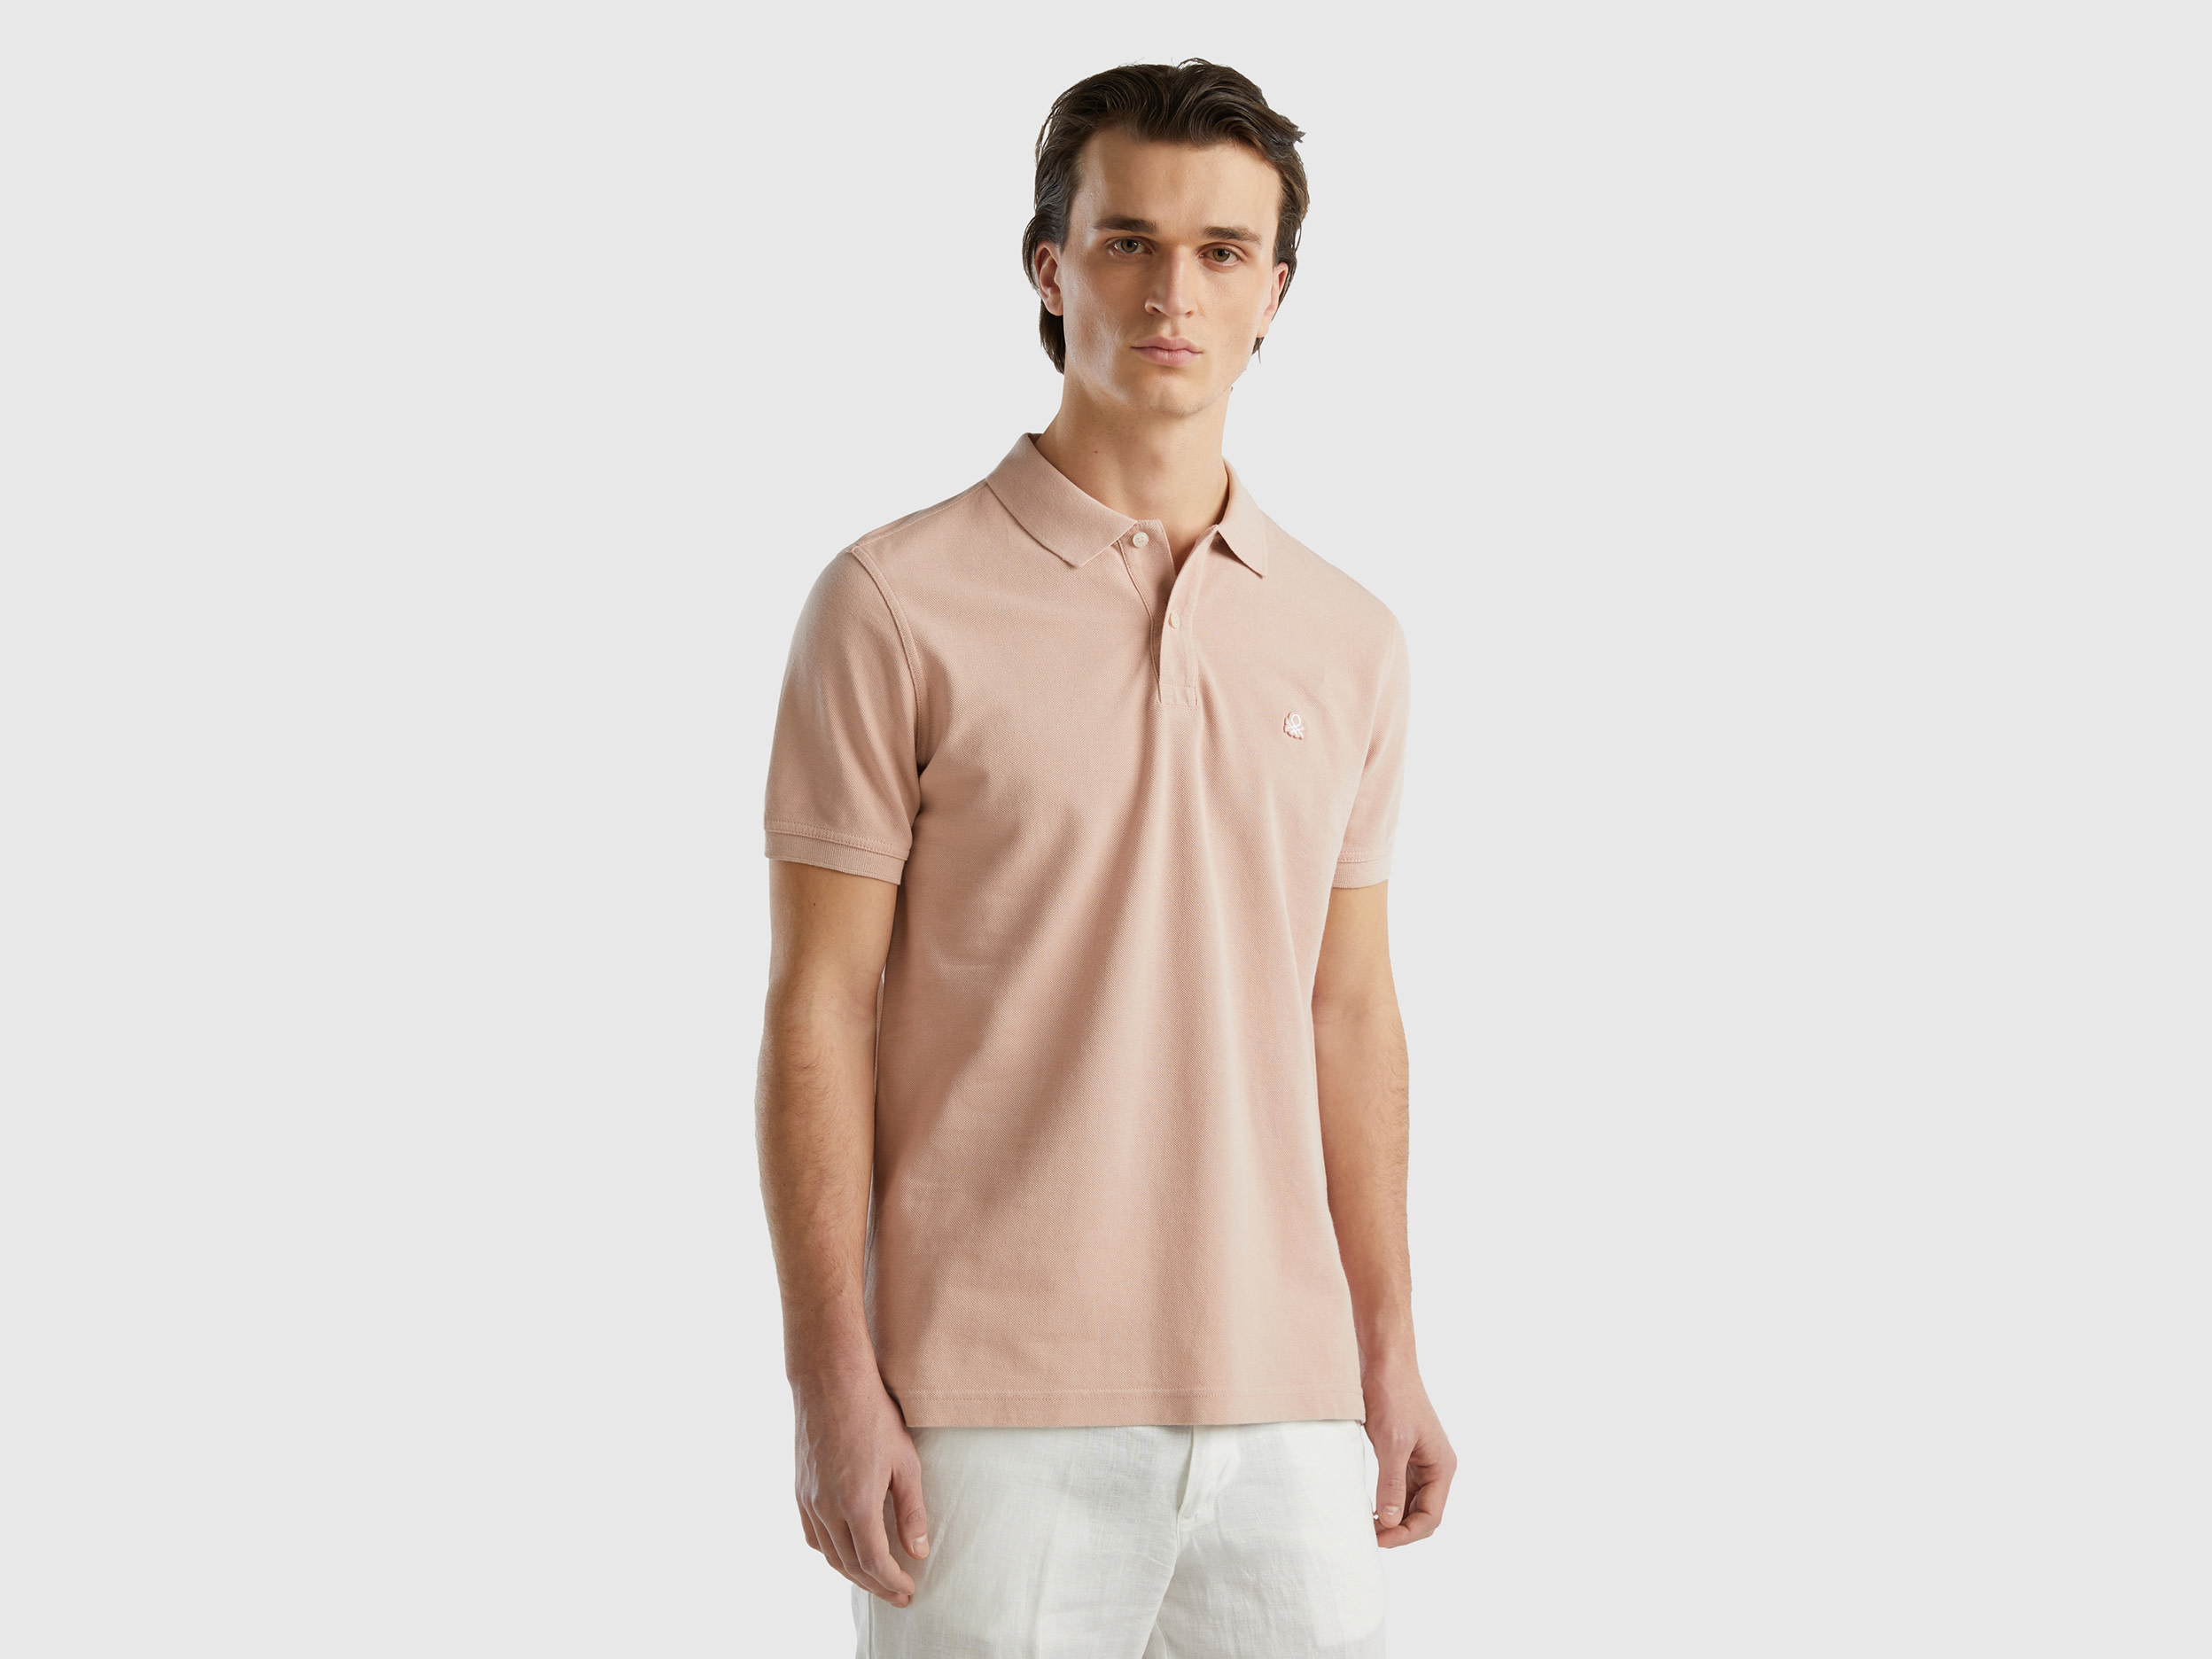 Image of Benetton, Pink Regular Fit Polo, size L, Nude, Men